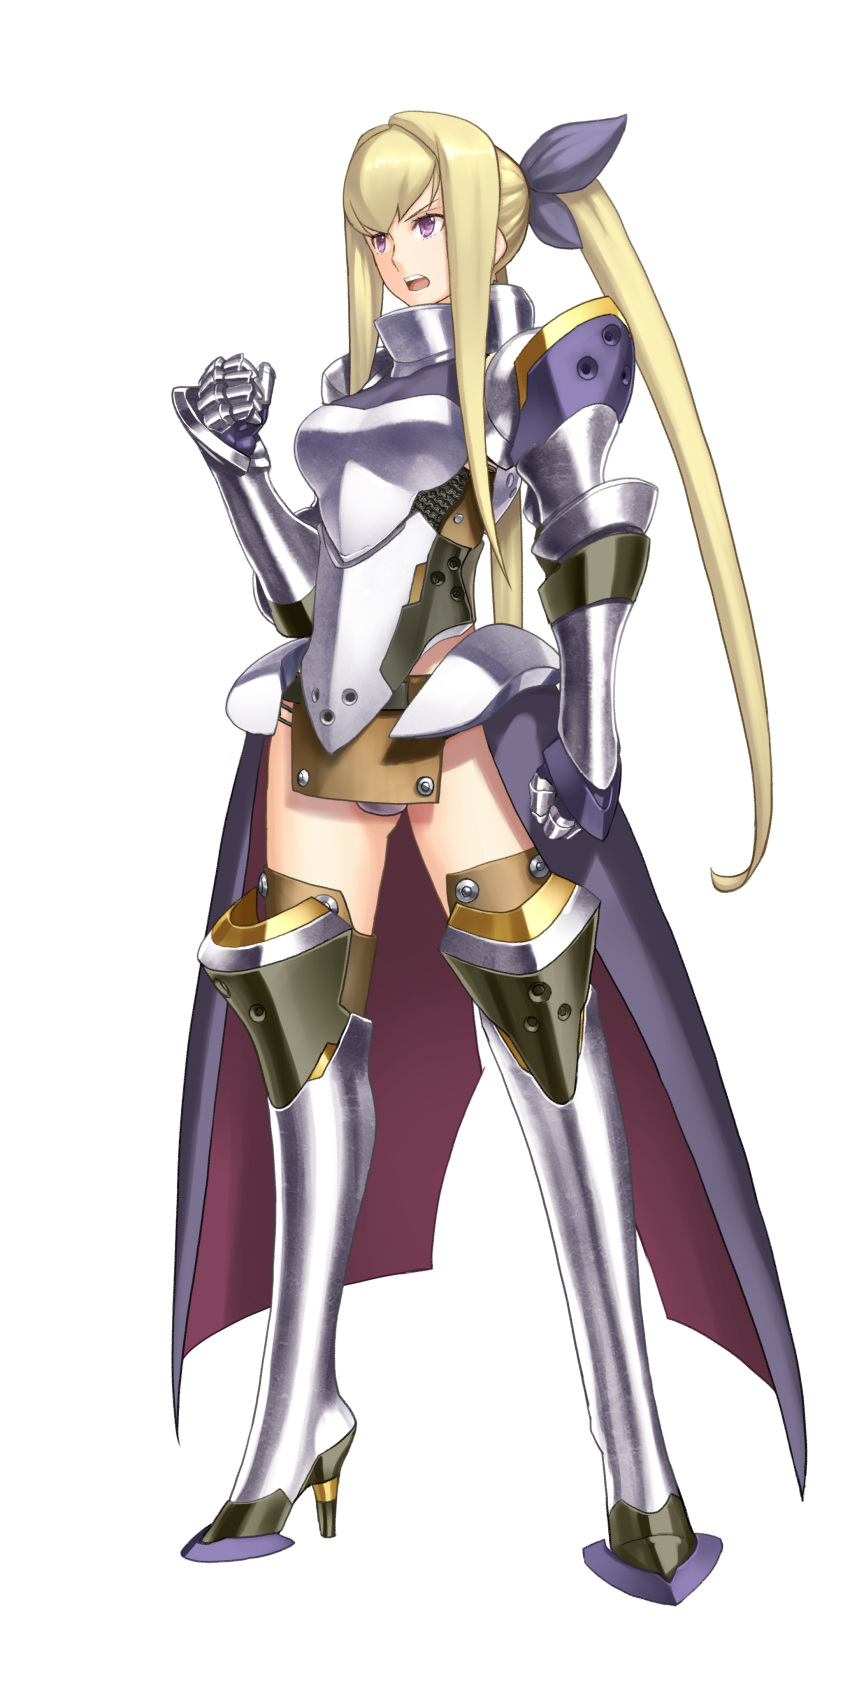 ar_tonelico ar_tonelico_iii armor blonde_hair bow clenched_hands fist gust high_heels highres legs long_hair long_legs nagi_ryou official_art open_mouth purple_eyes sakia-rumei sakia_lumei shoes thighs violet_eyes